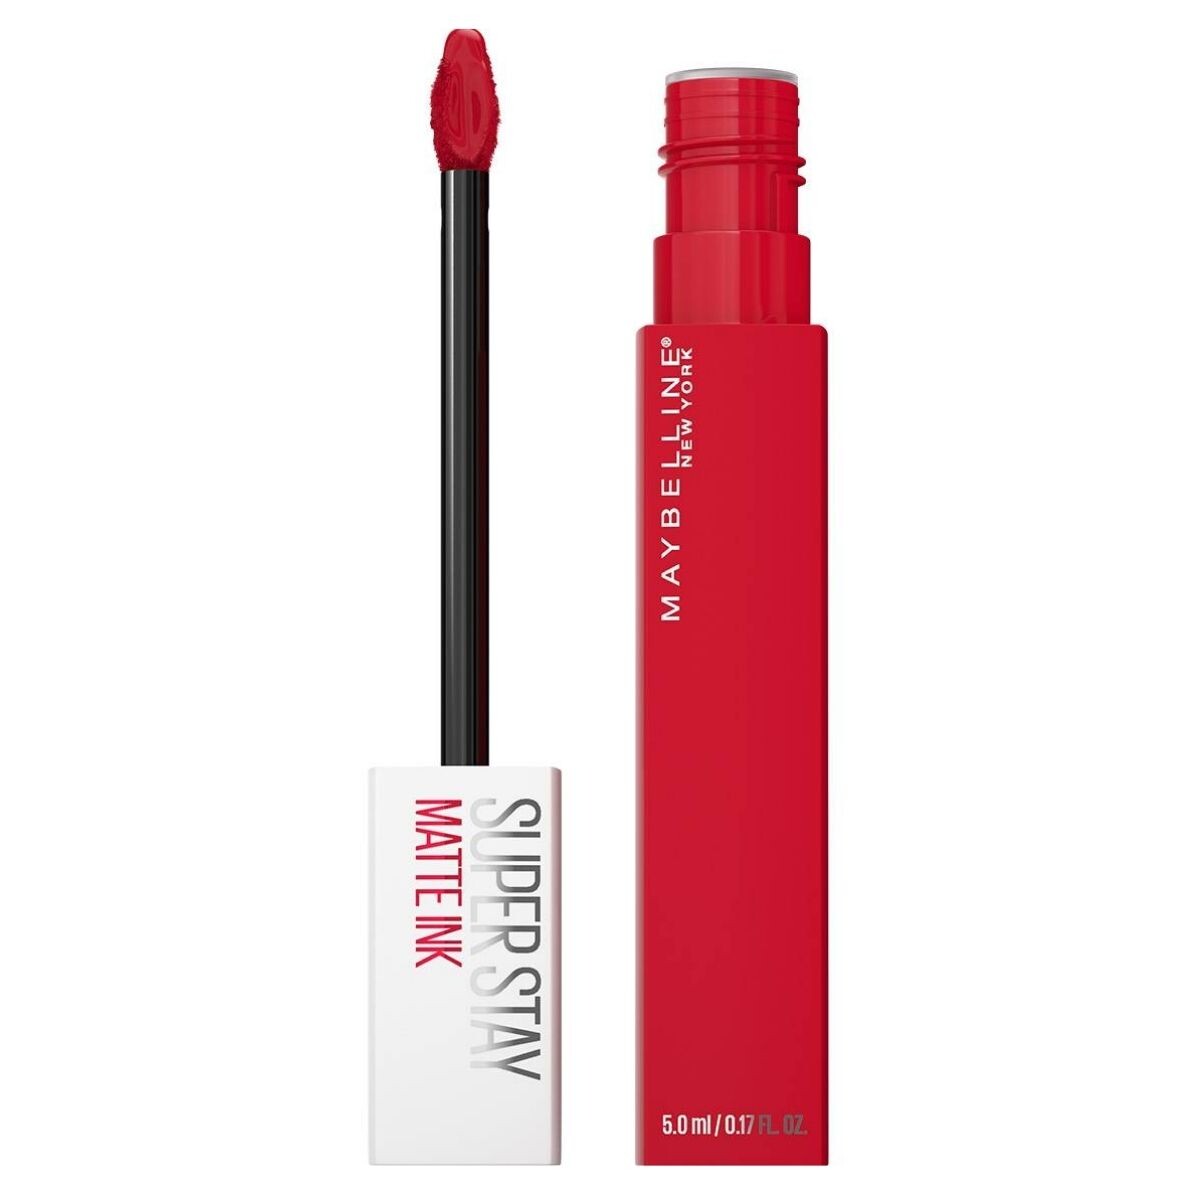 Labial Maybelline Super Stay Spice Edition - Shot Caller 325 